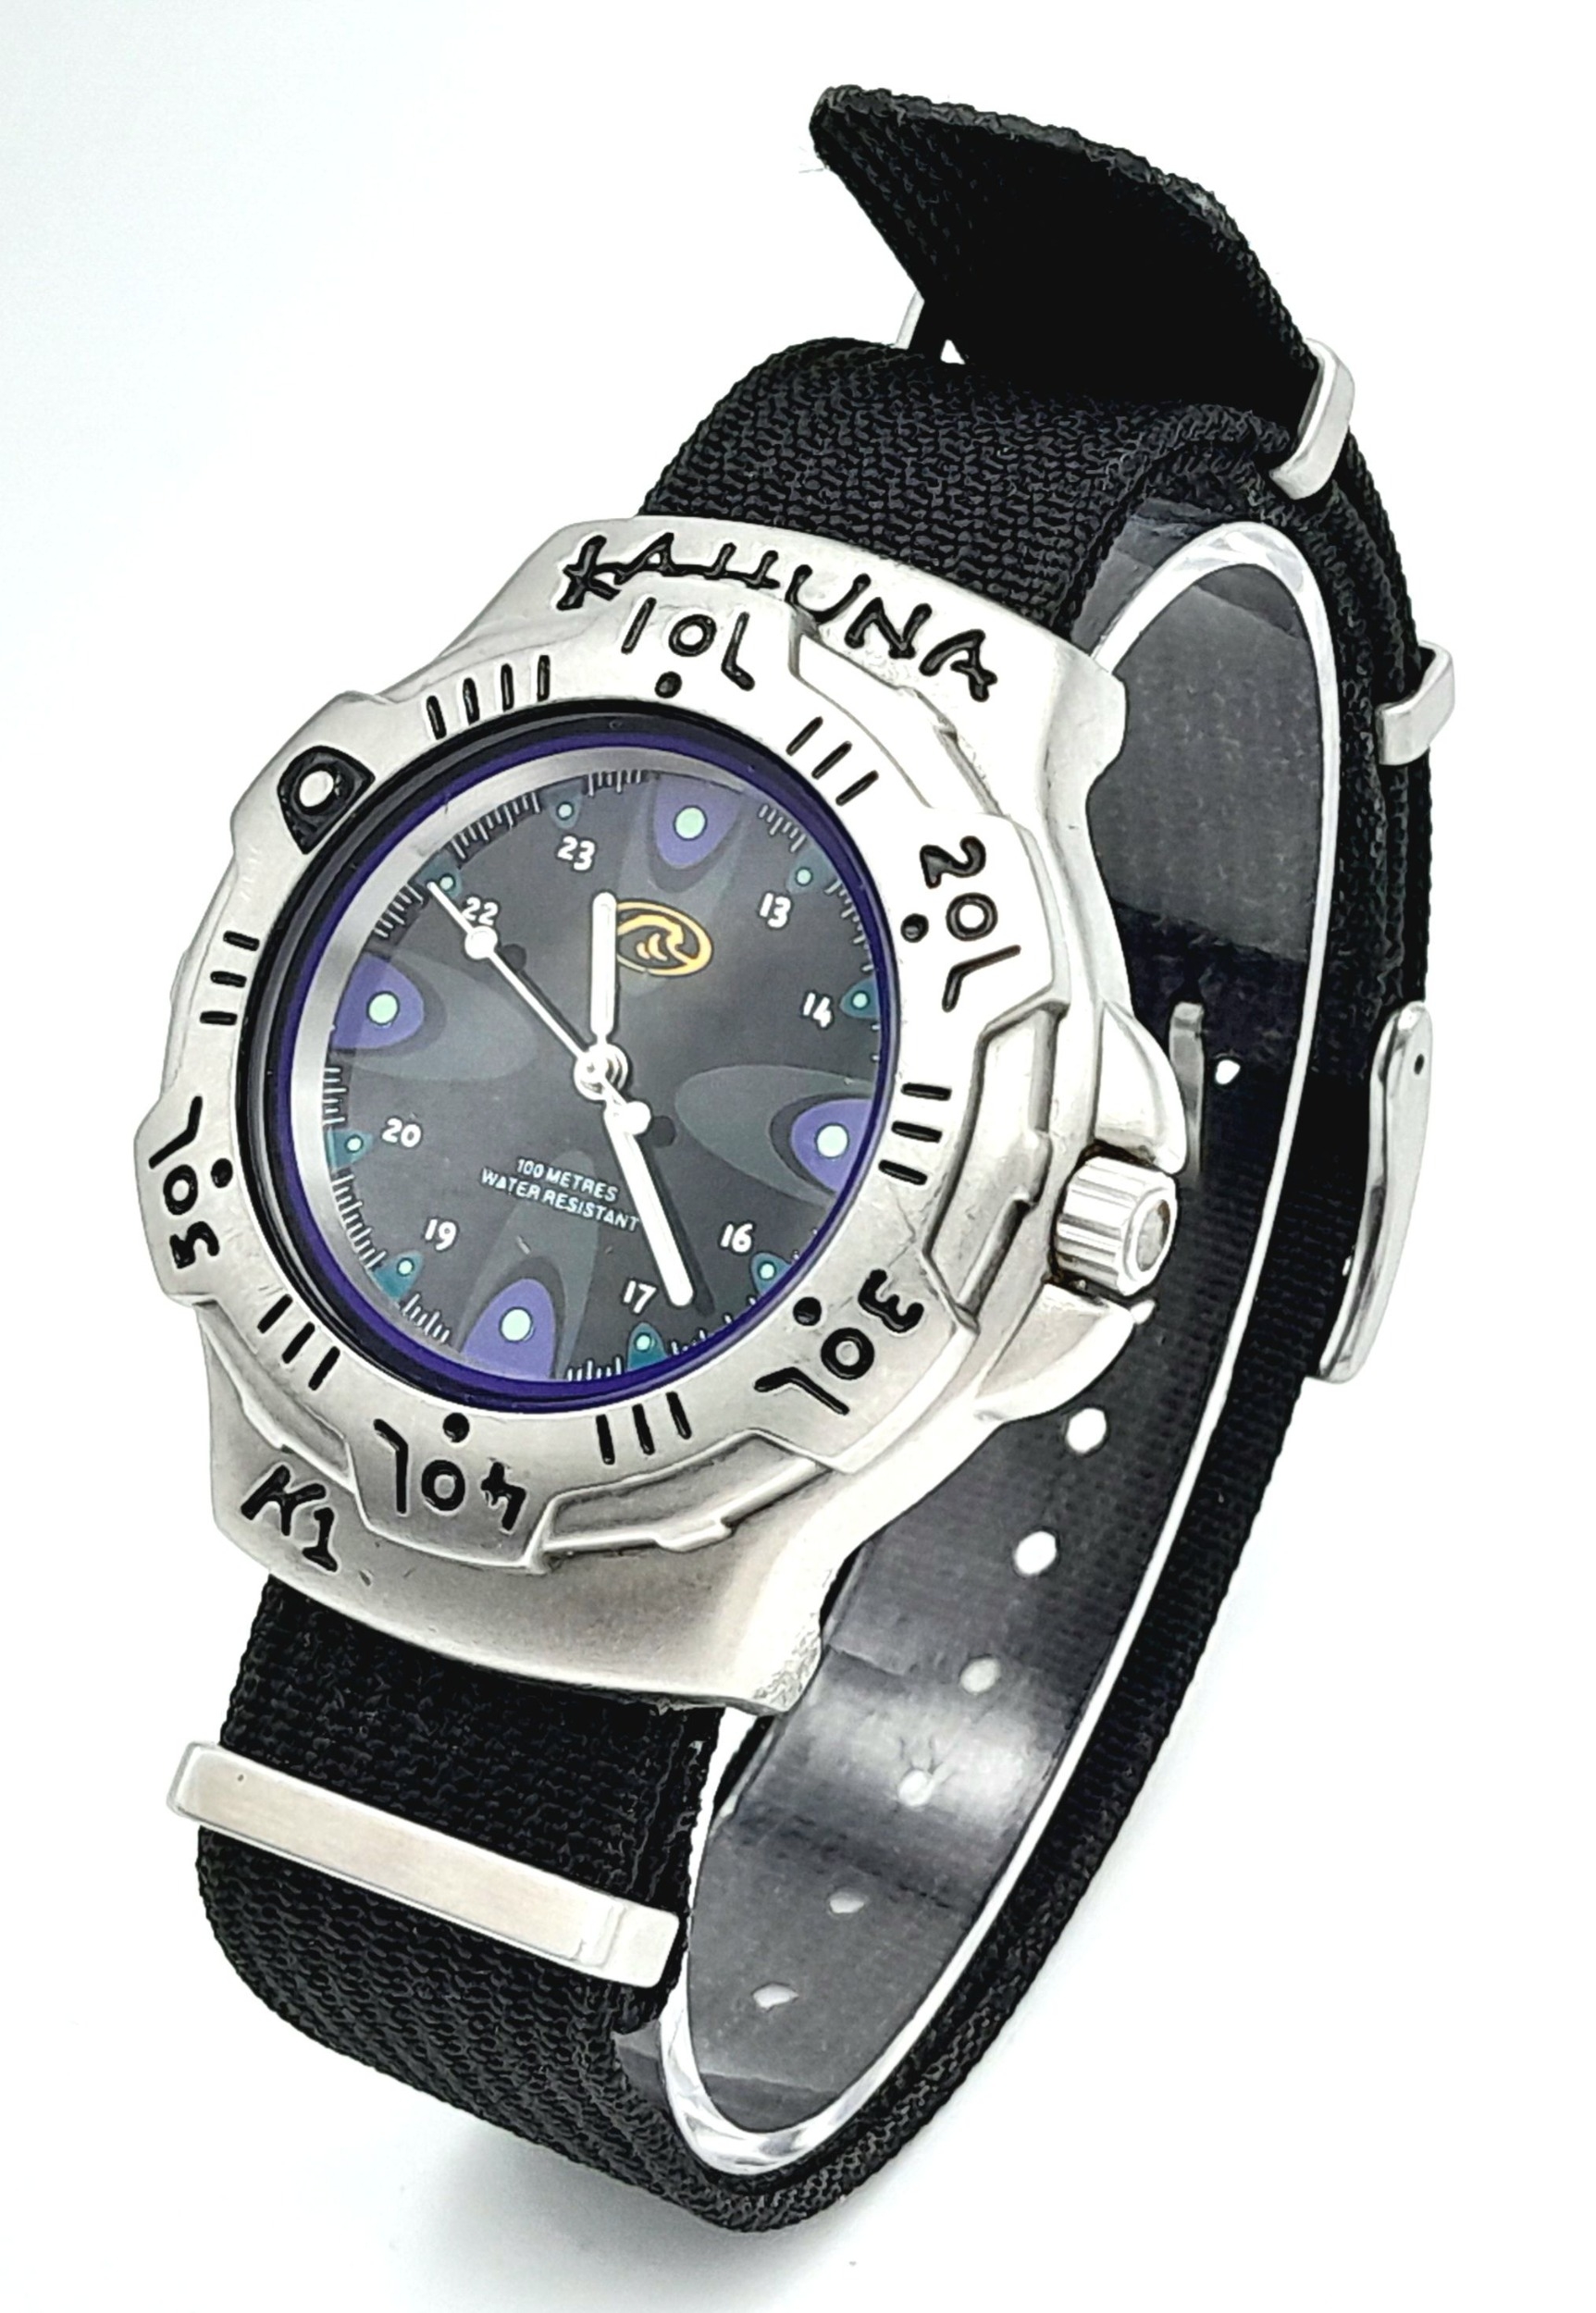 A Men’s Quartz Surf Watch by Kahuna. 45mm including crown. On a black WatchGecko military Nato